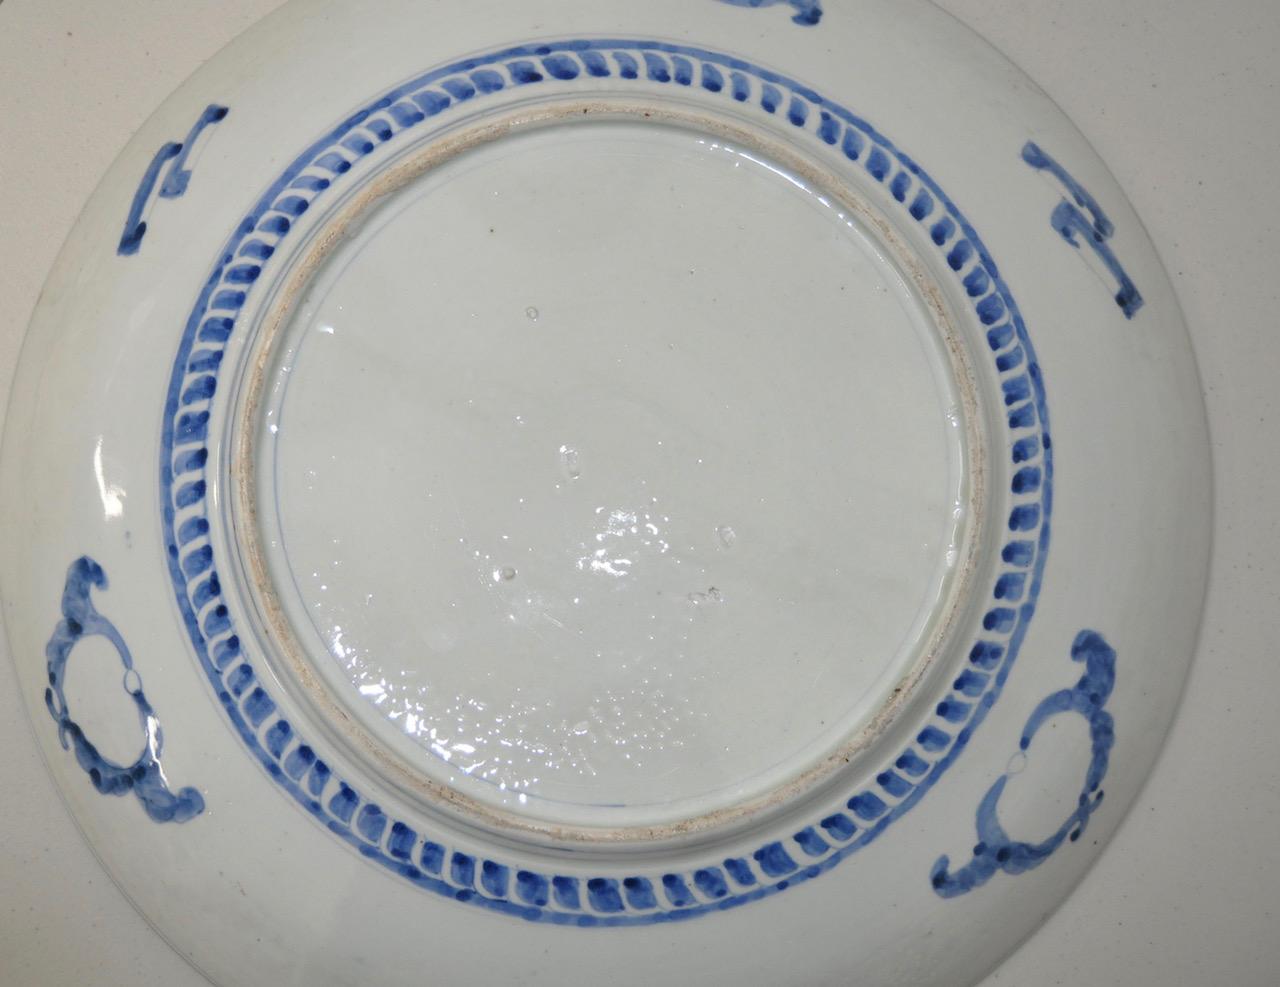 Antique Chinese Enameled Ceramic Platter, 19th Century For Sale 2